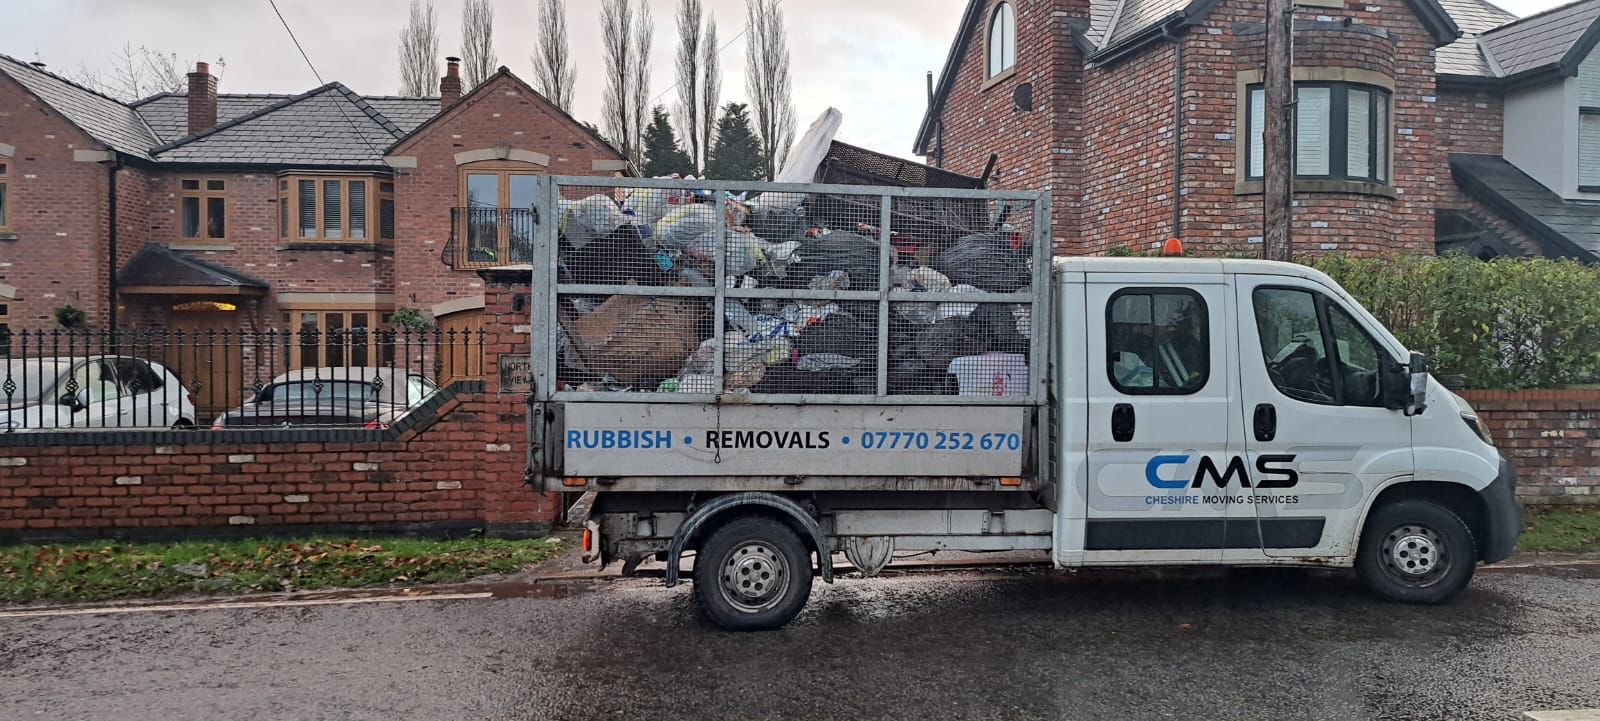 Waste Removal Van Cheshire